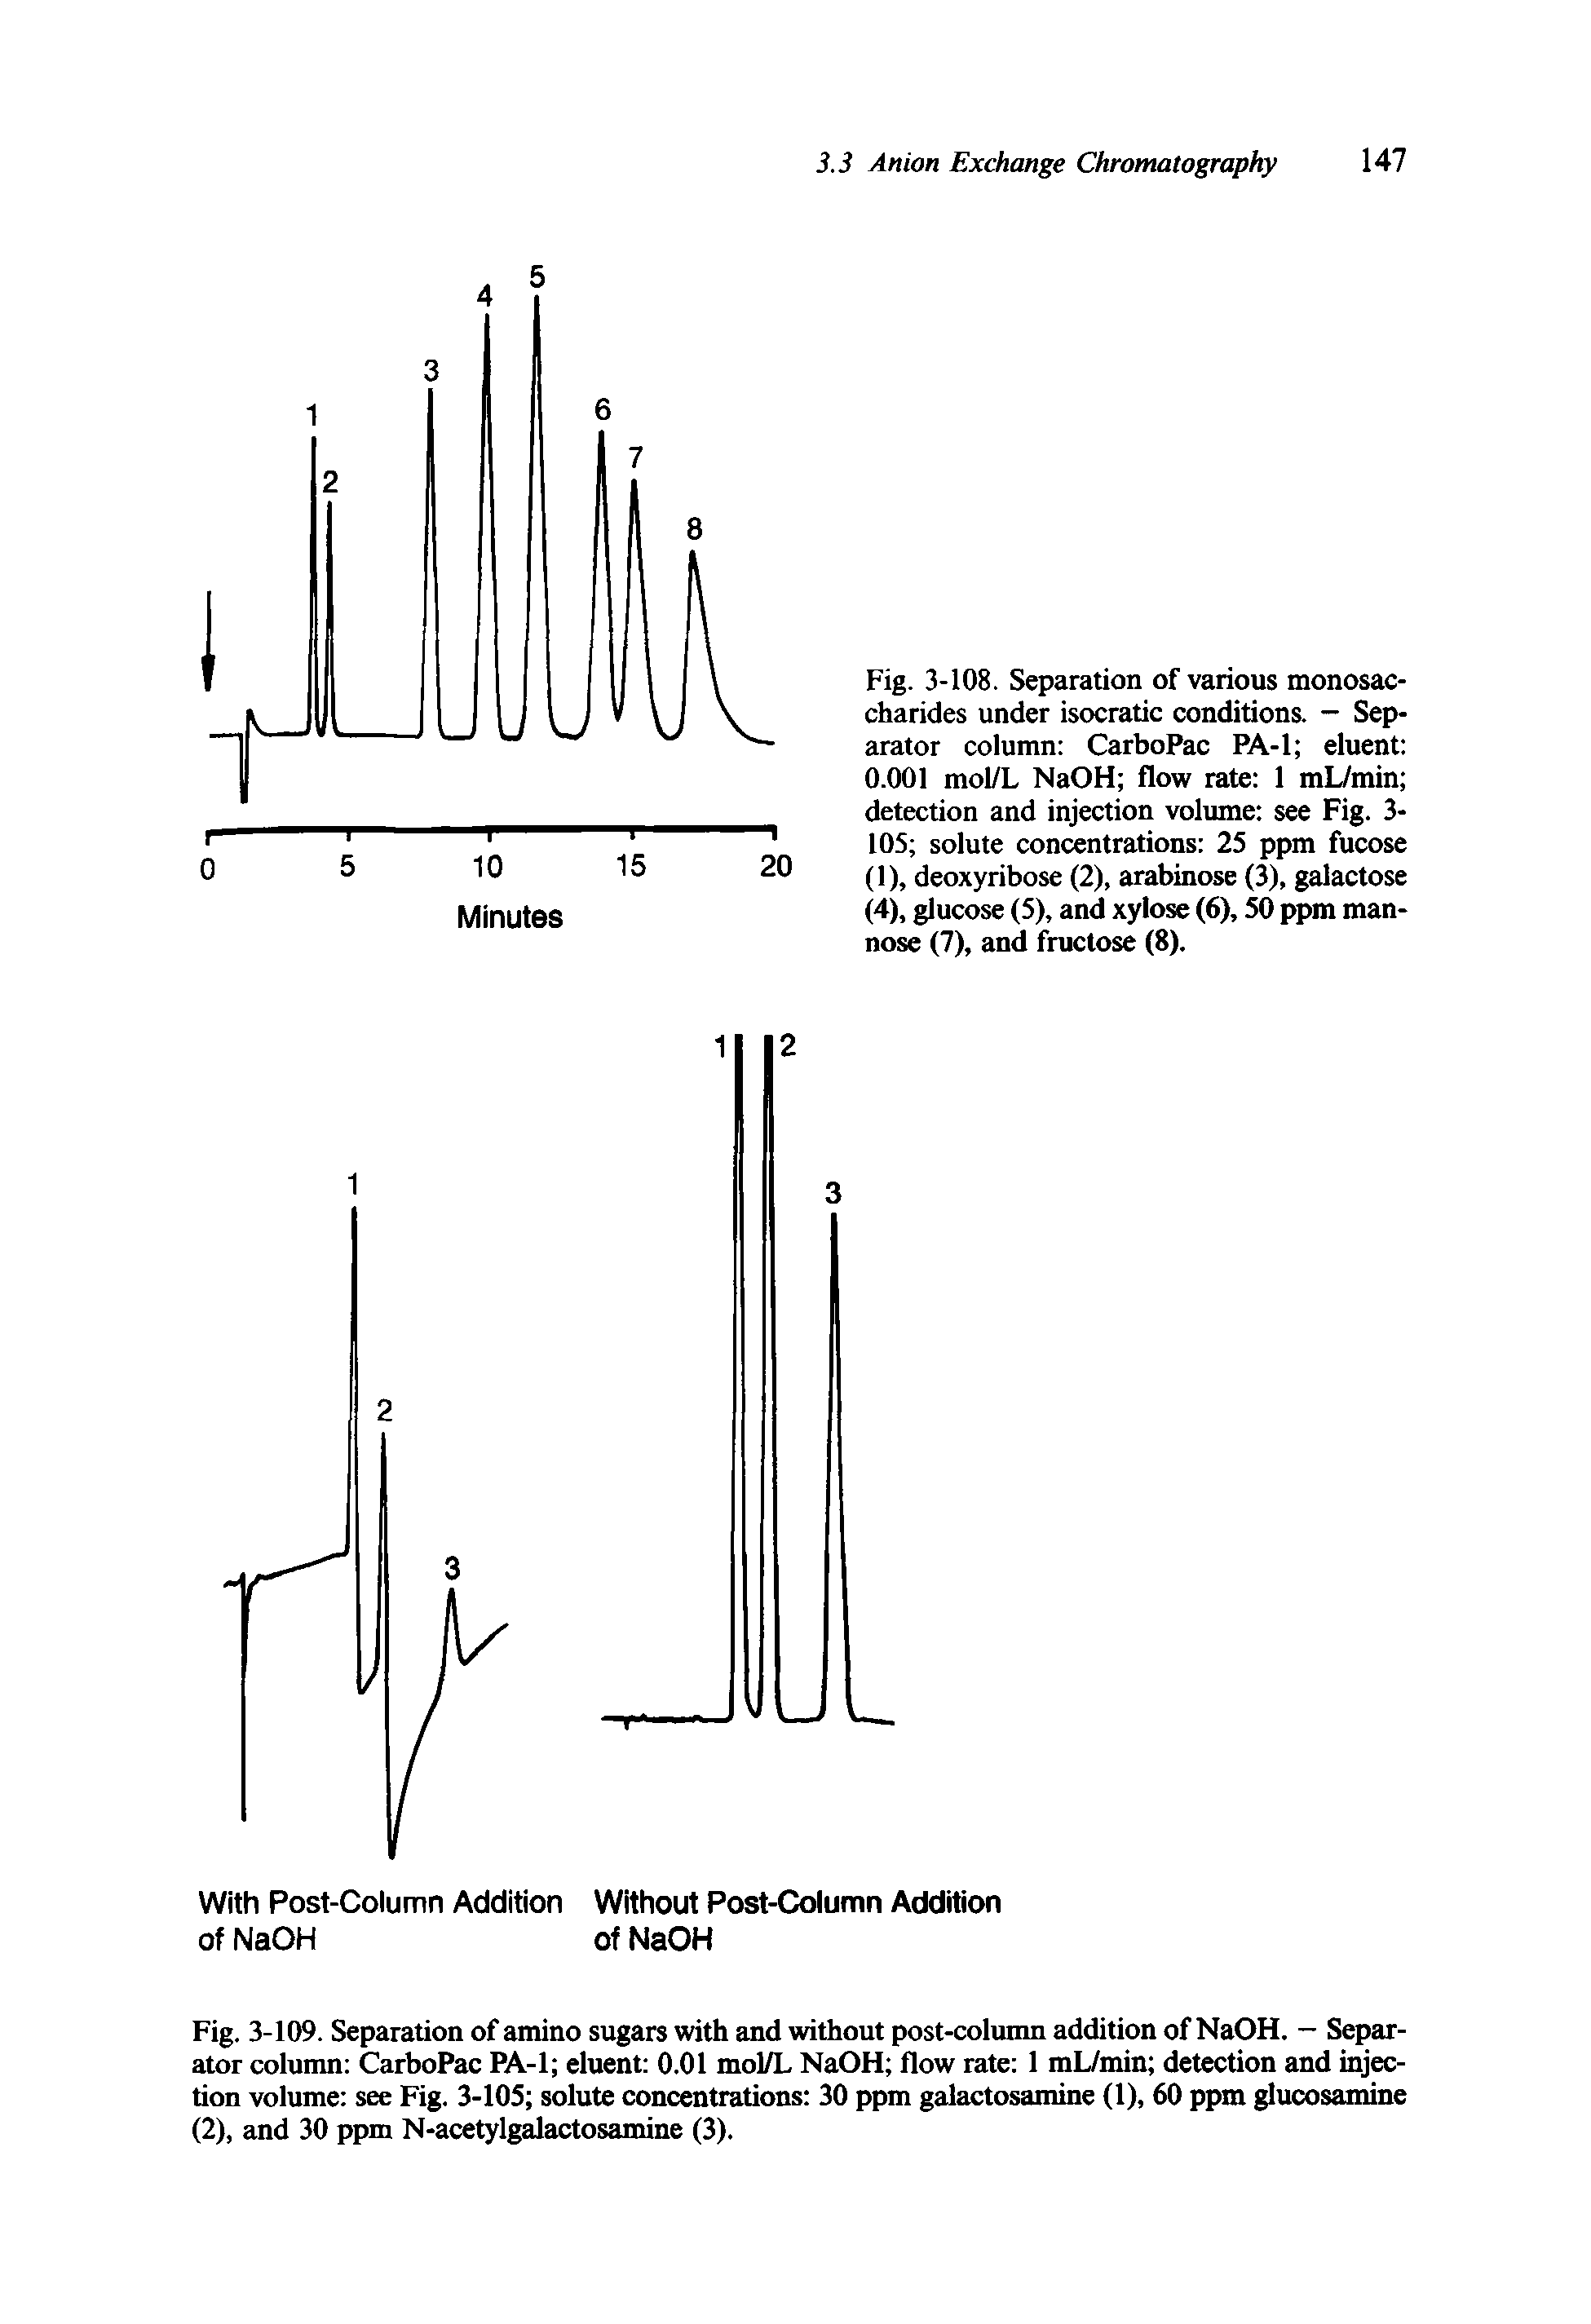 Fig. 3-109. Separation of amino sugars with and without post-column addition of NaOH. - Separator column CarboPac PA-1 eluent 0.01 mol/L NaOH flow rate 1 mL/min detection and injection volume see Fig. 3-105 solute concentrations 30 ppm galactosamine (1), 60 ppm glucosamine (2), and 30 ppm N-acetylgalactosamine (3).